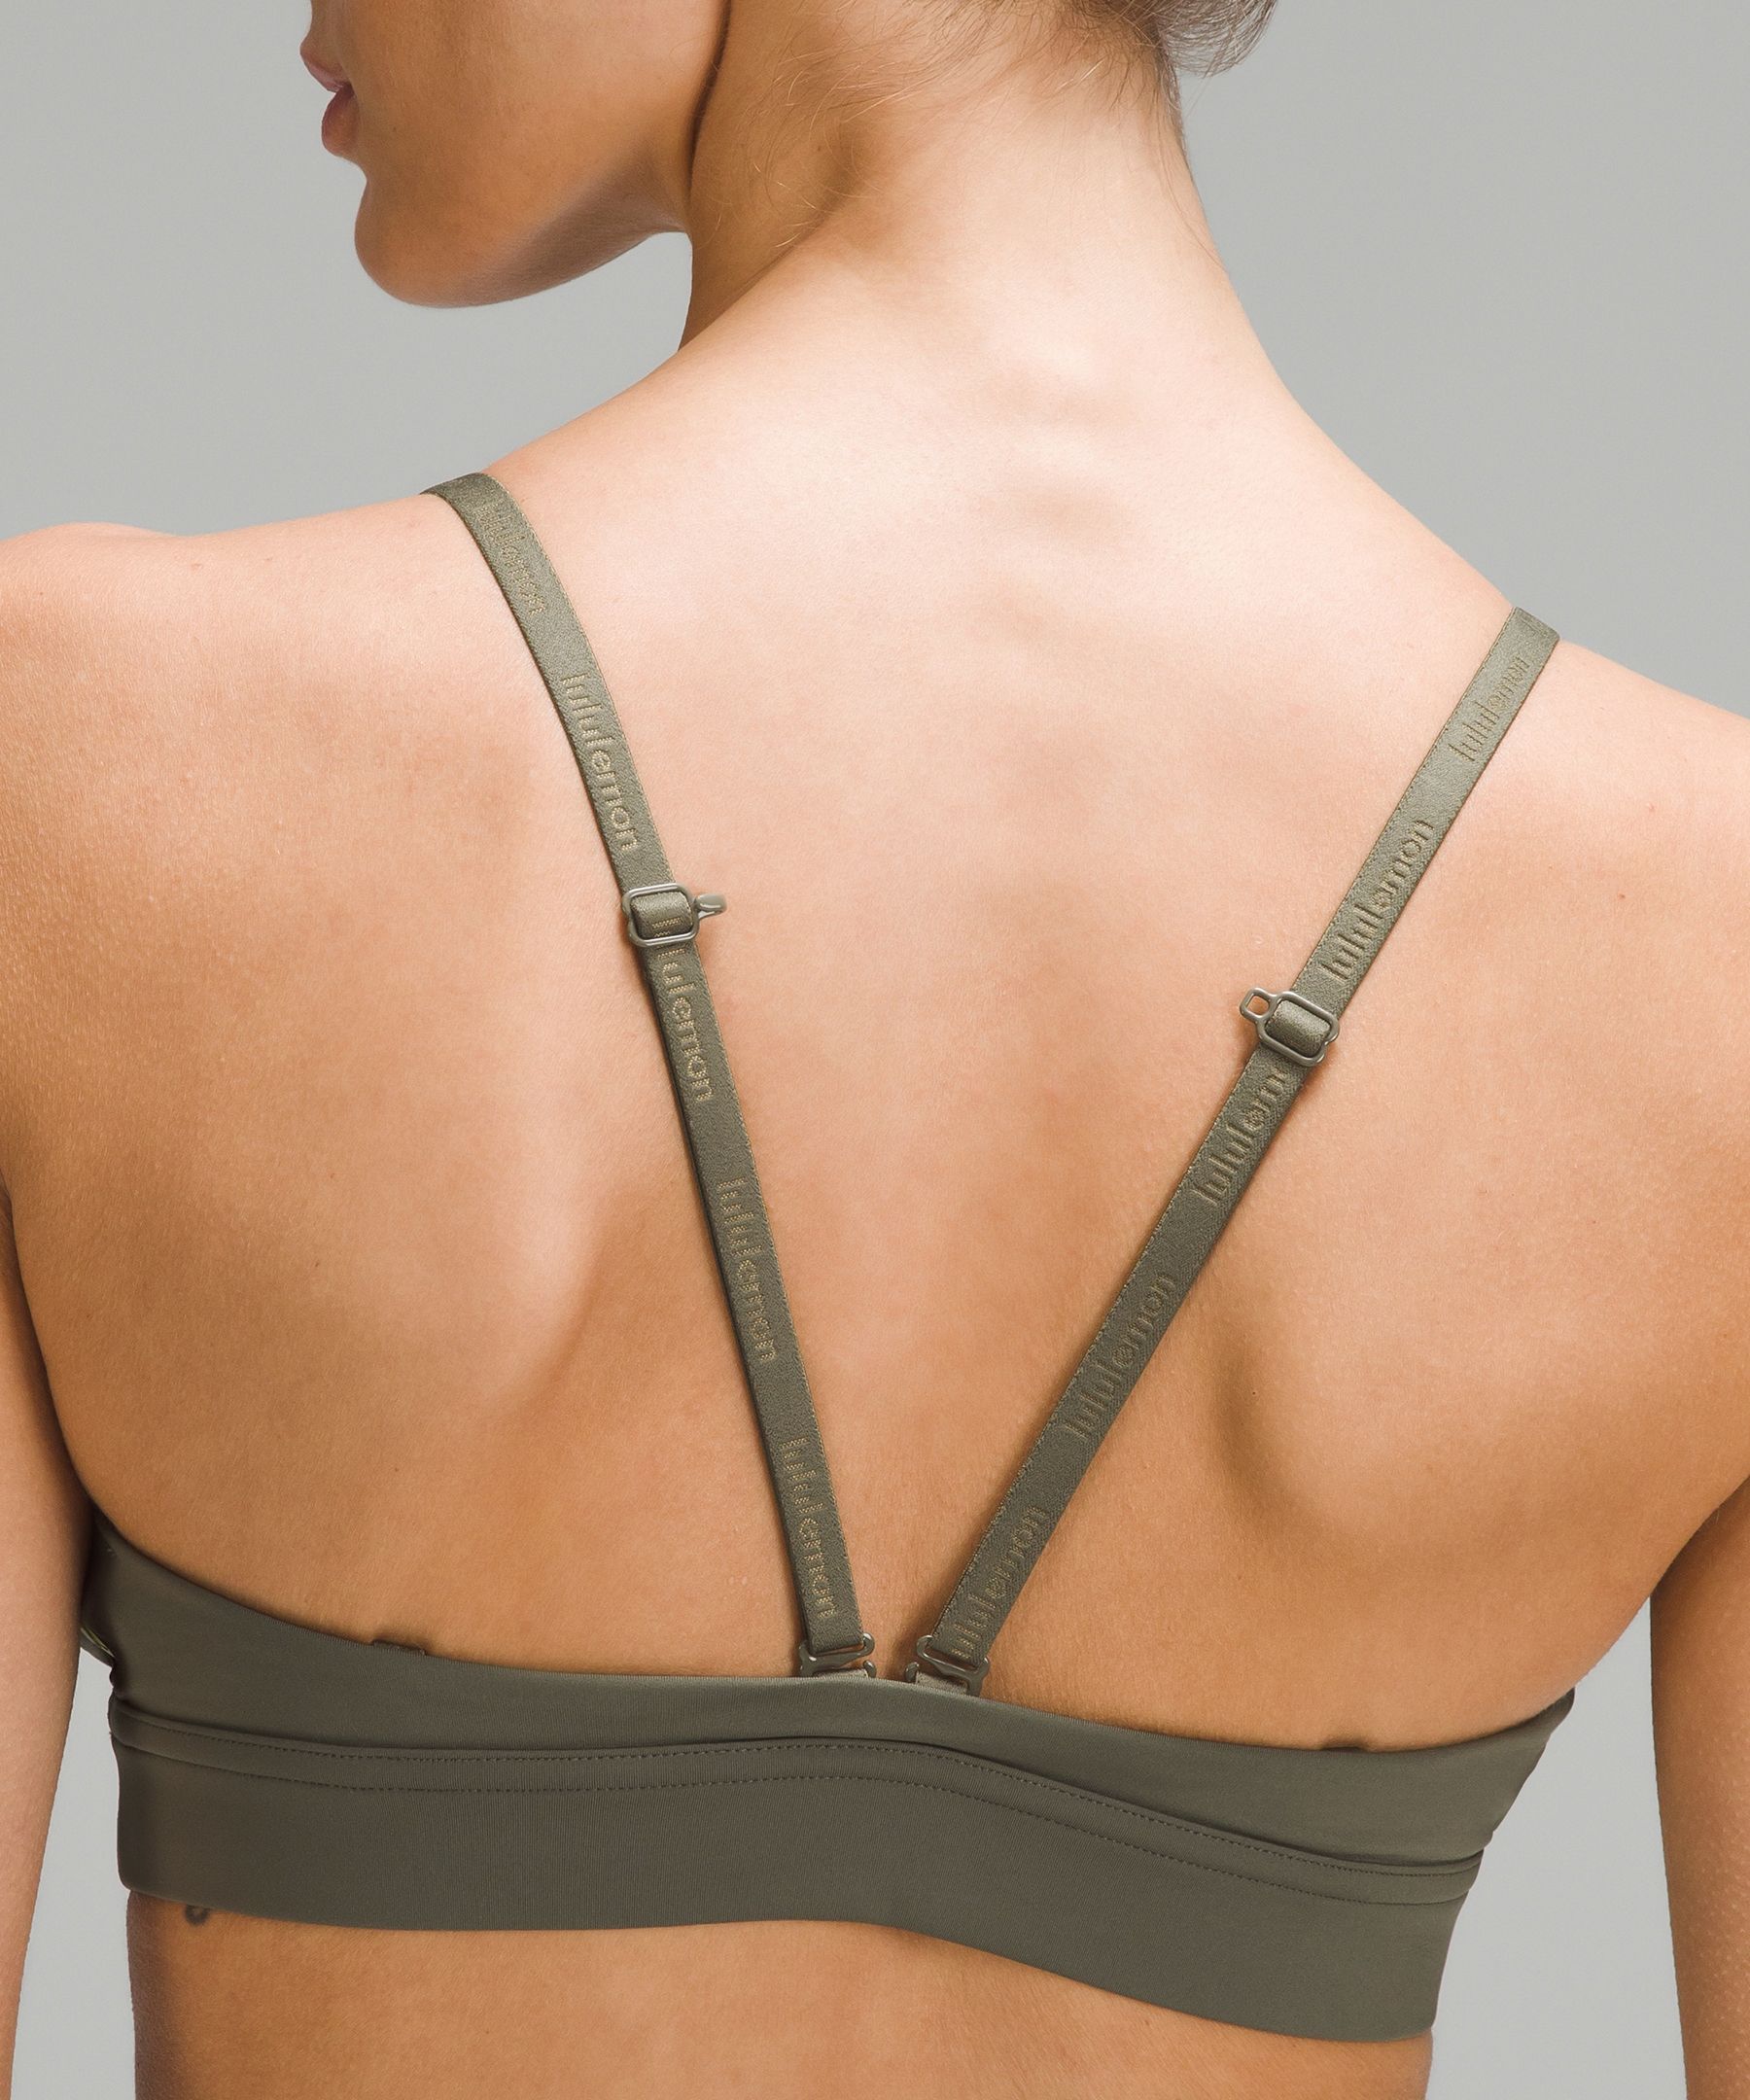 License to Train Triangle Bra *Light Support, A/B Cup | Women's Bras